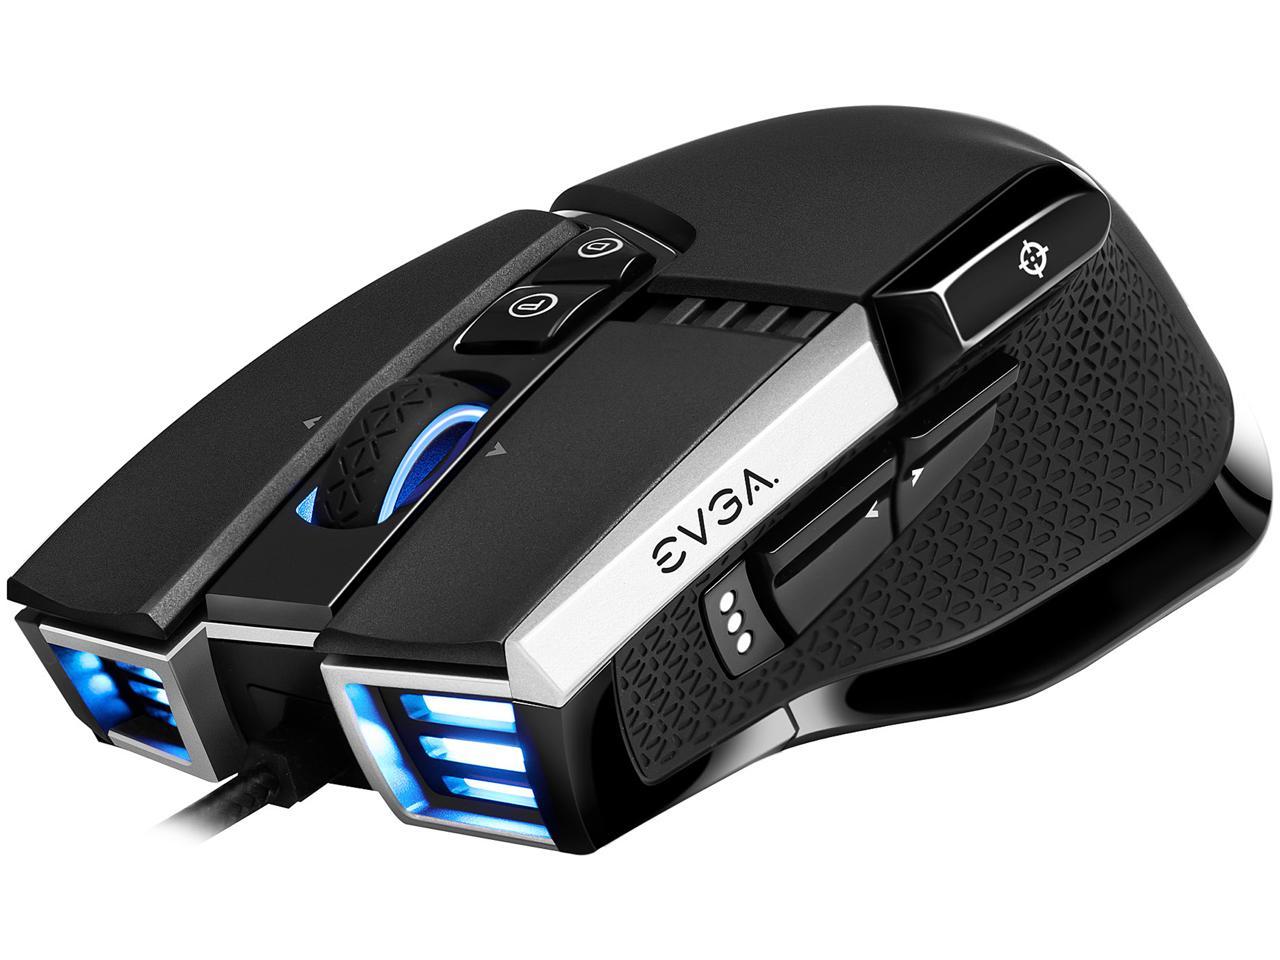 EVGA X17 Wired Optical Gaming Mouse $17